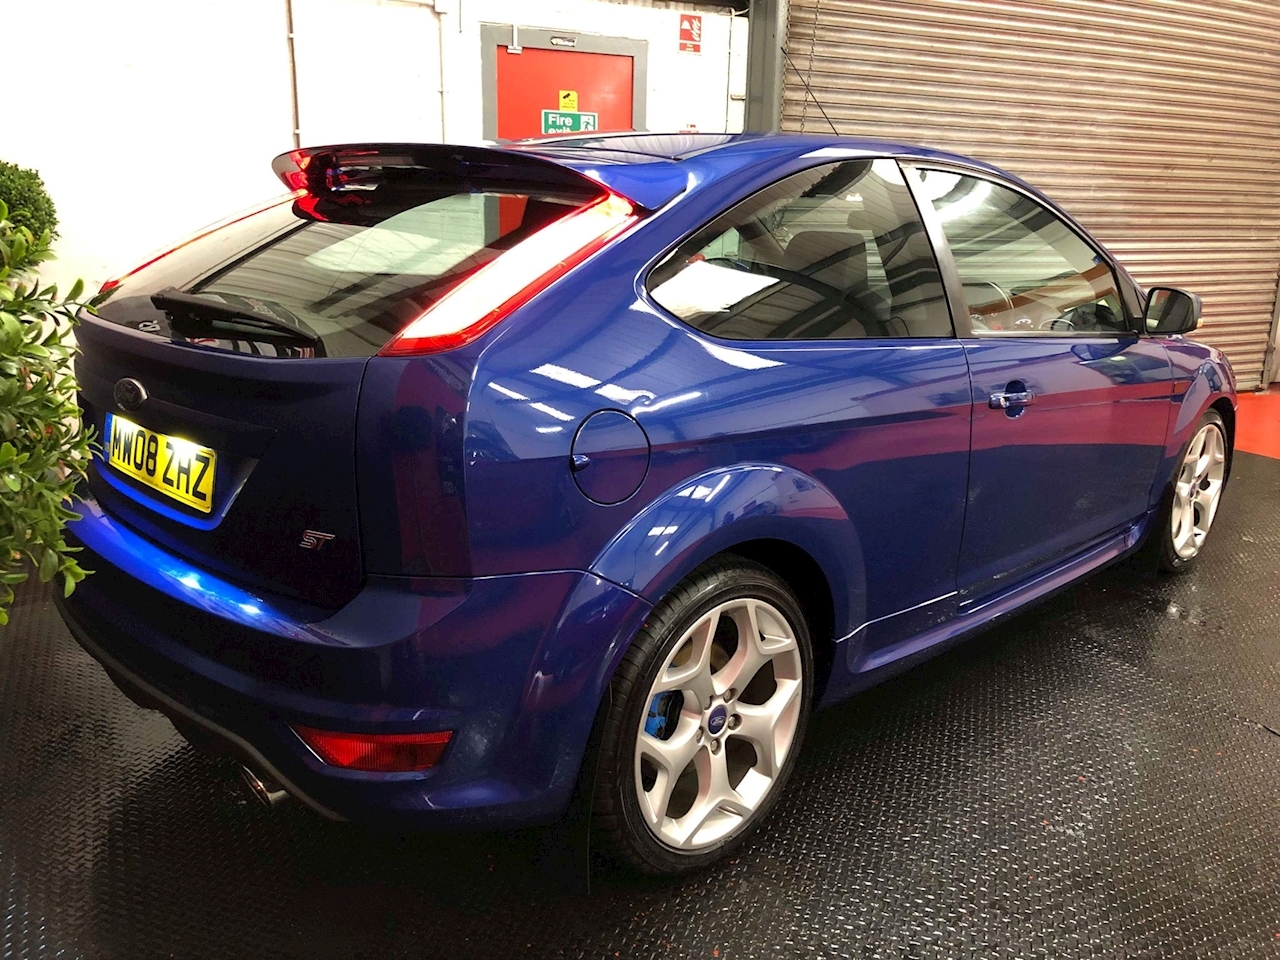 Used 2008 Ford Focus St-2 Hatchback 2.5 Manual Petrol For Sale in ...